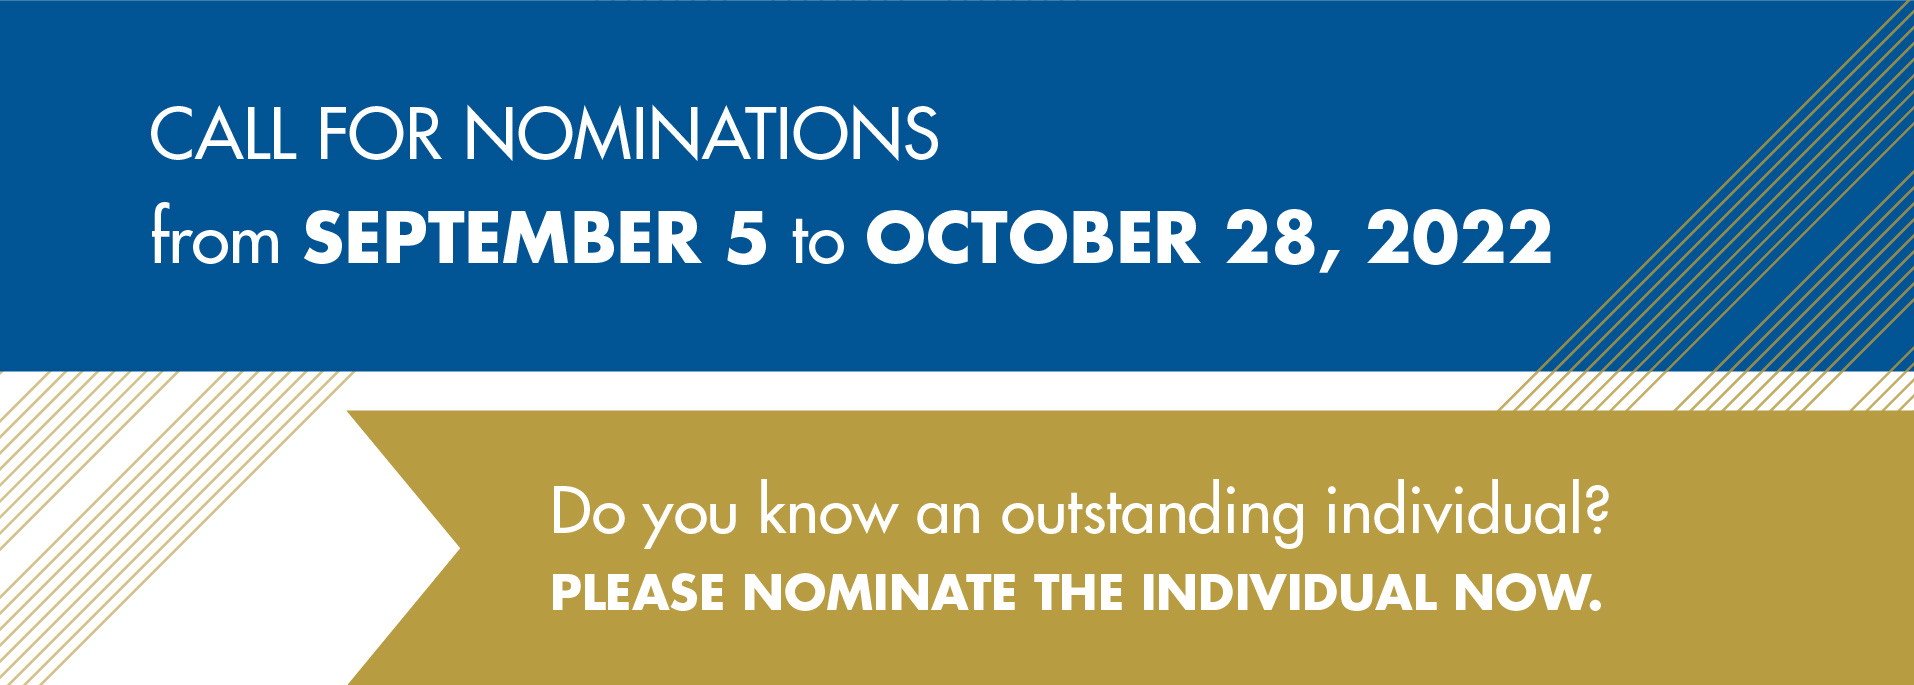 Call for nominations from September 5 to October 28, 2022.